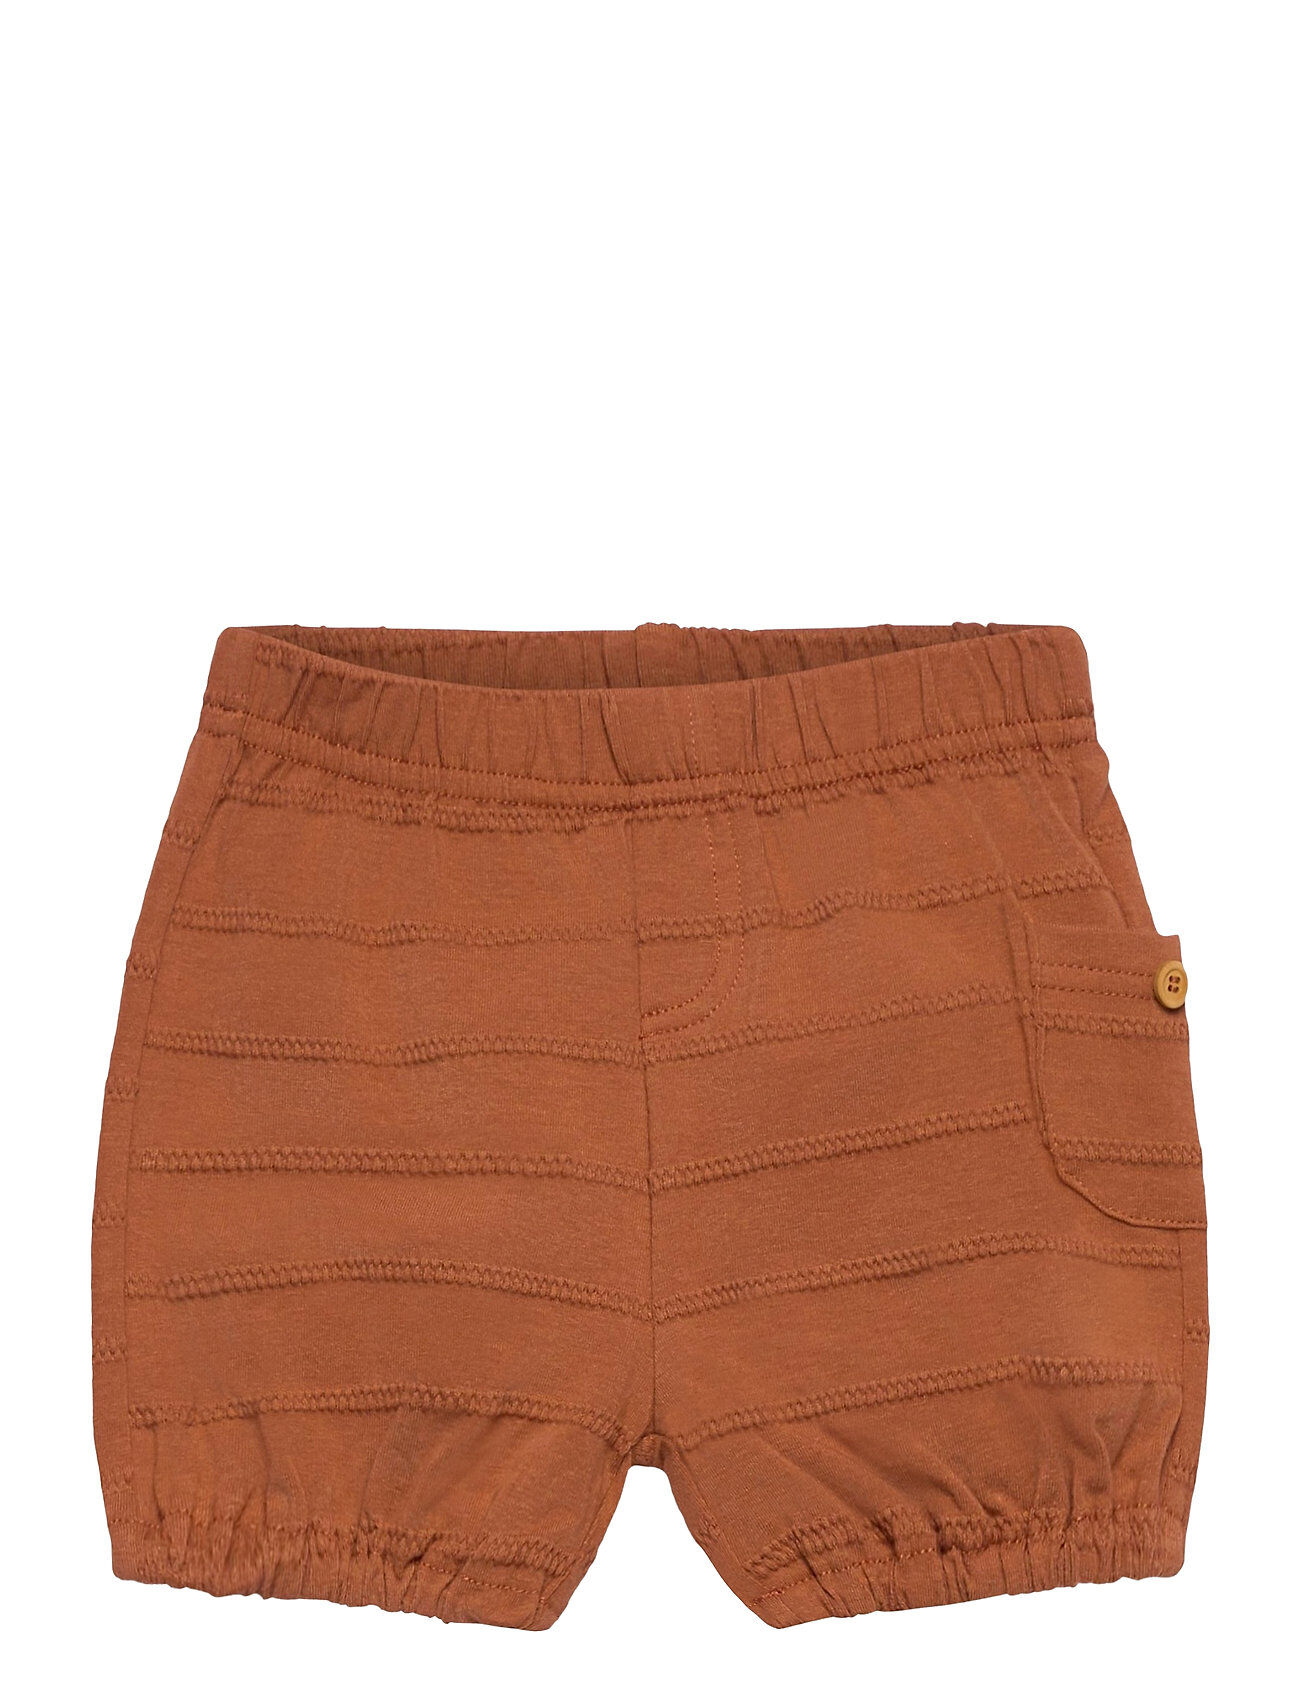 Hust & Claire Hei - Shorts Shorts Bloomers Brun Hust & Claire